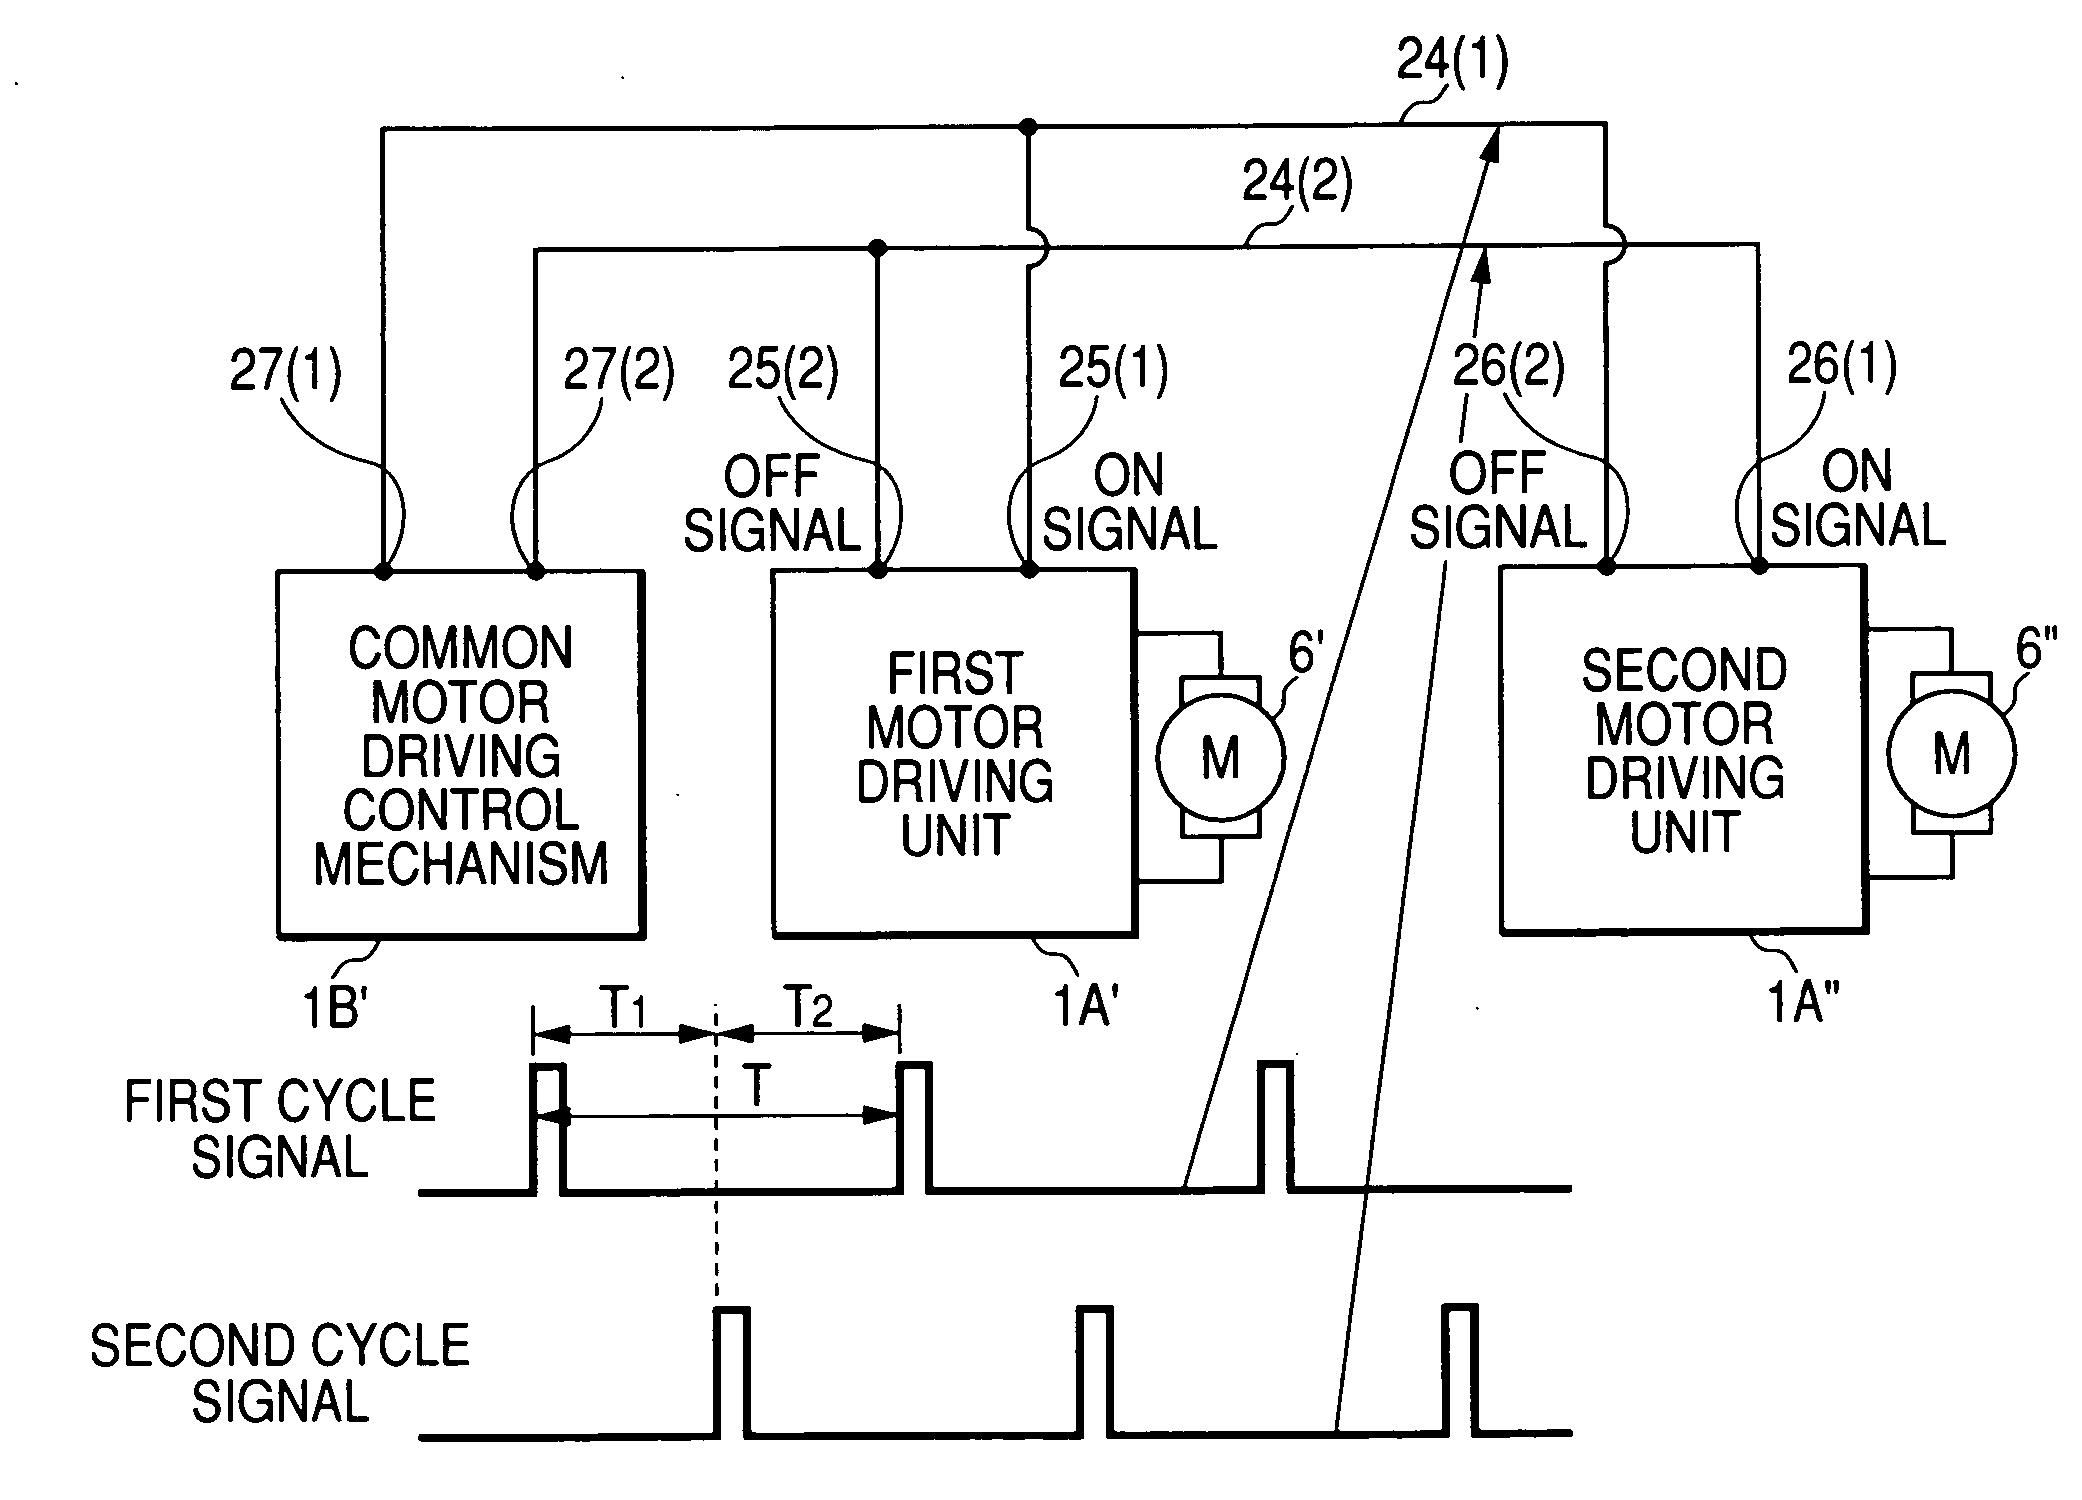 Motor driving control device to be driven at interval of constant time